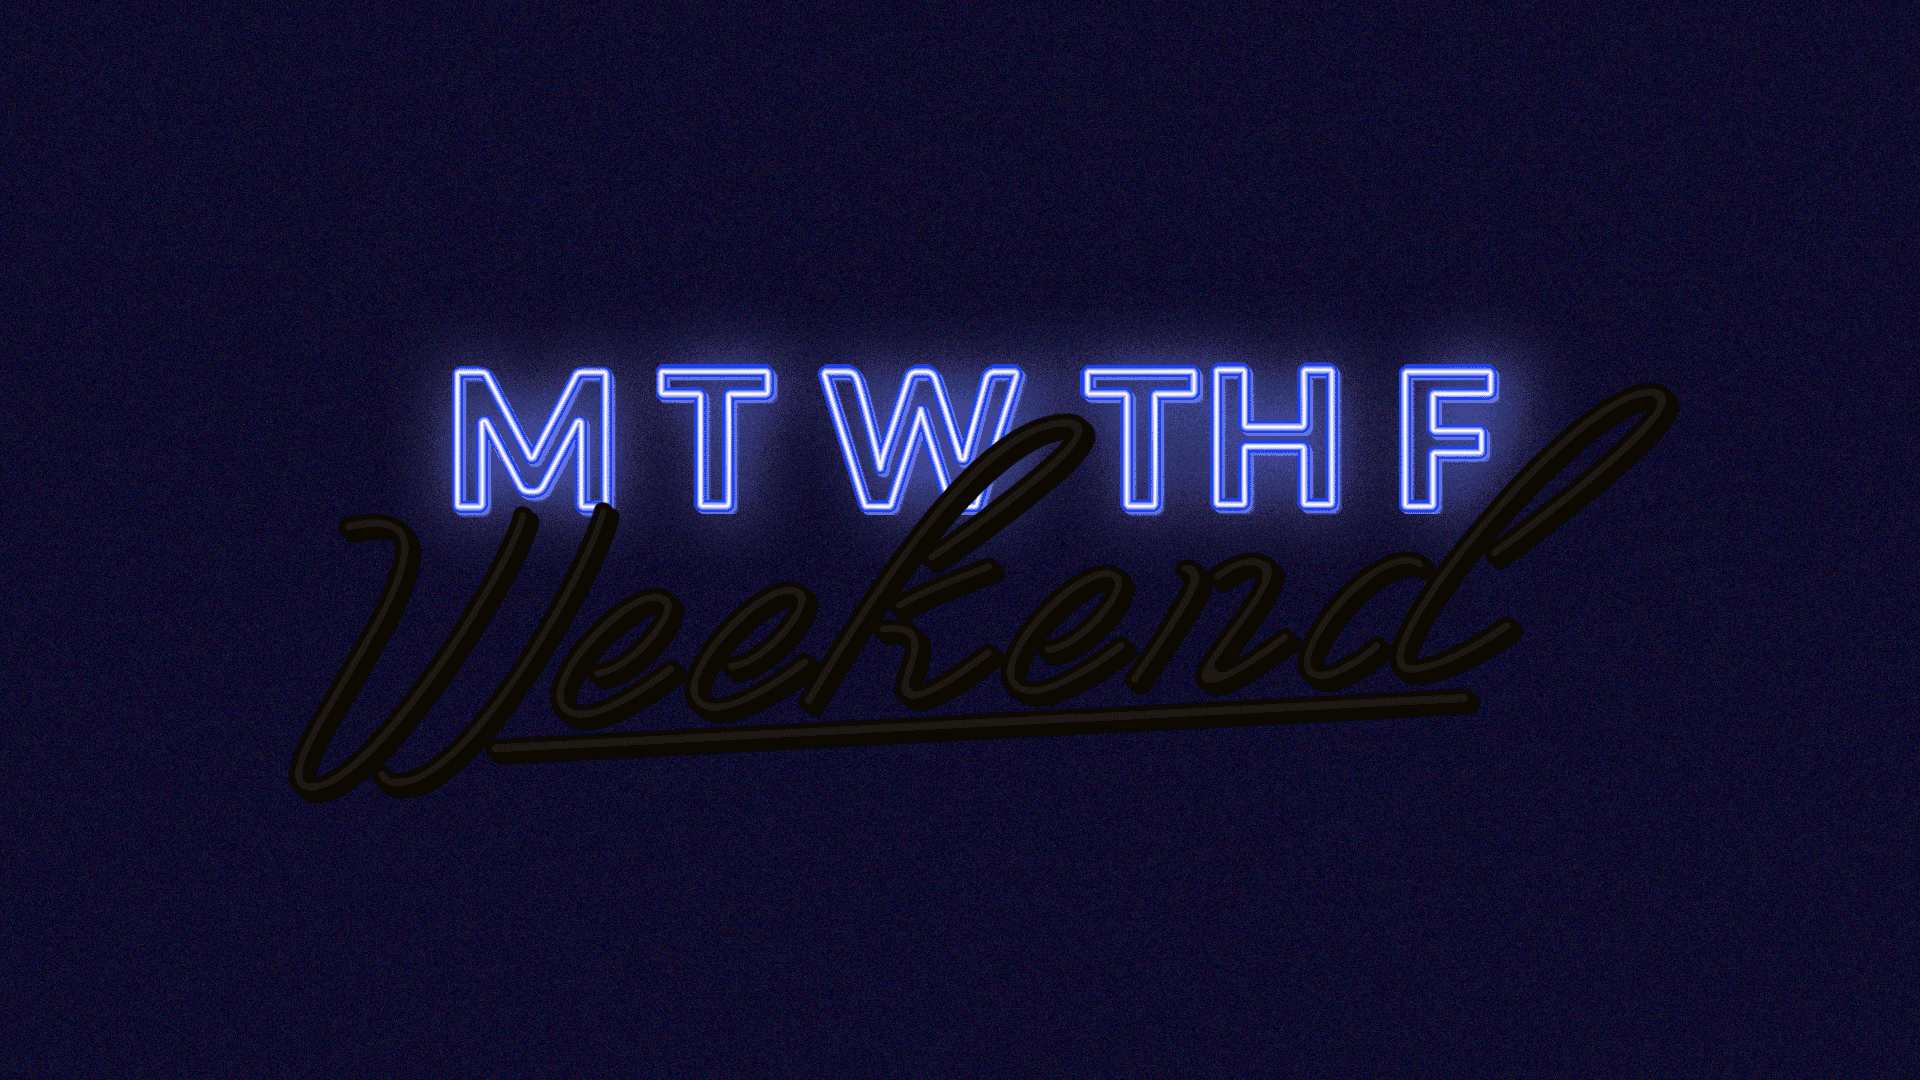 A gif of signage that says "M, T, W, T, F Weekend"